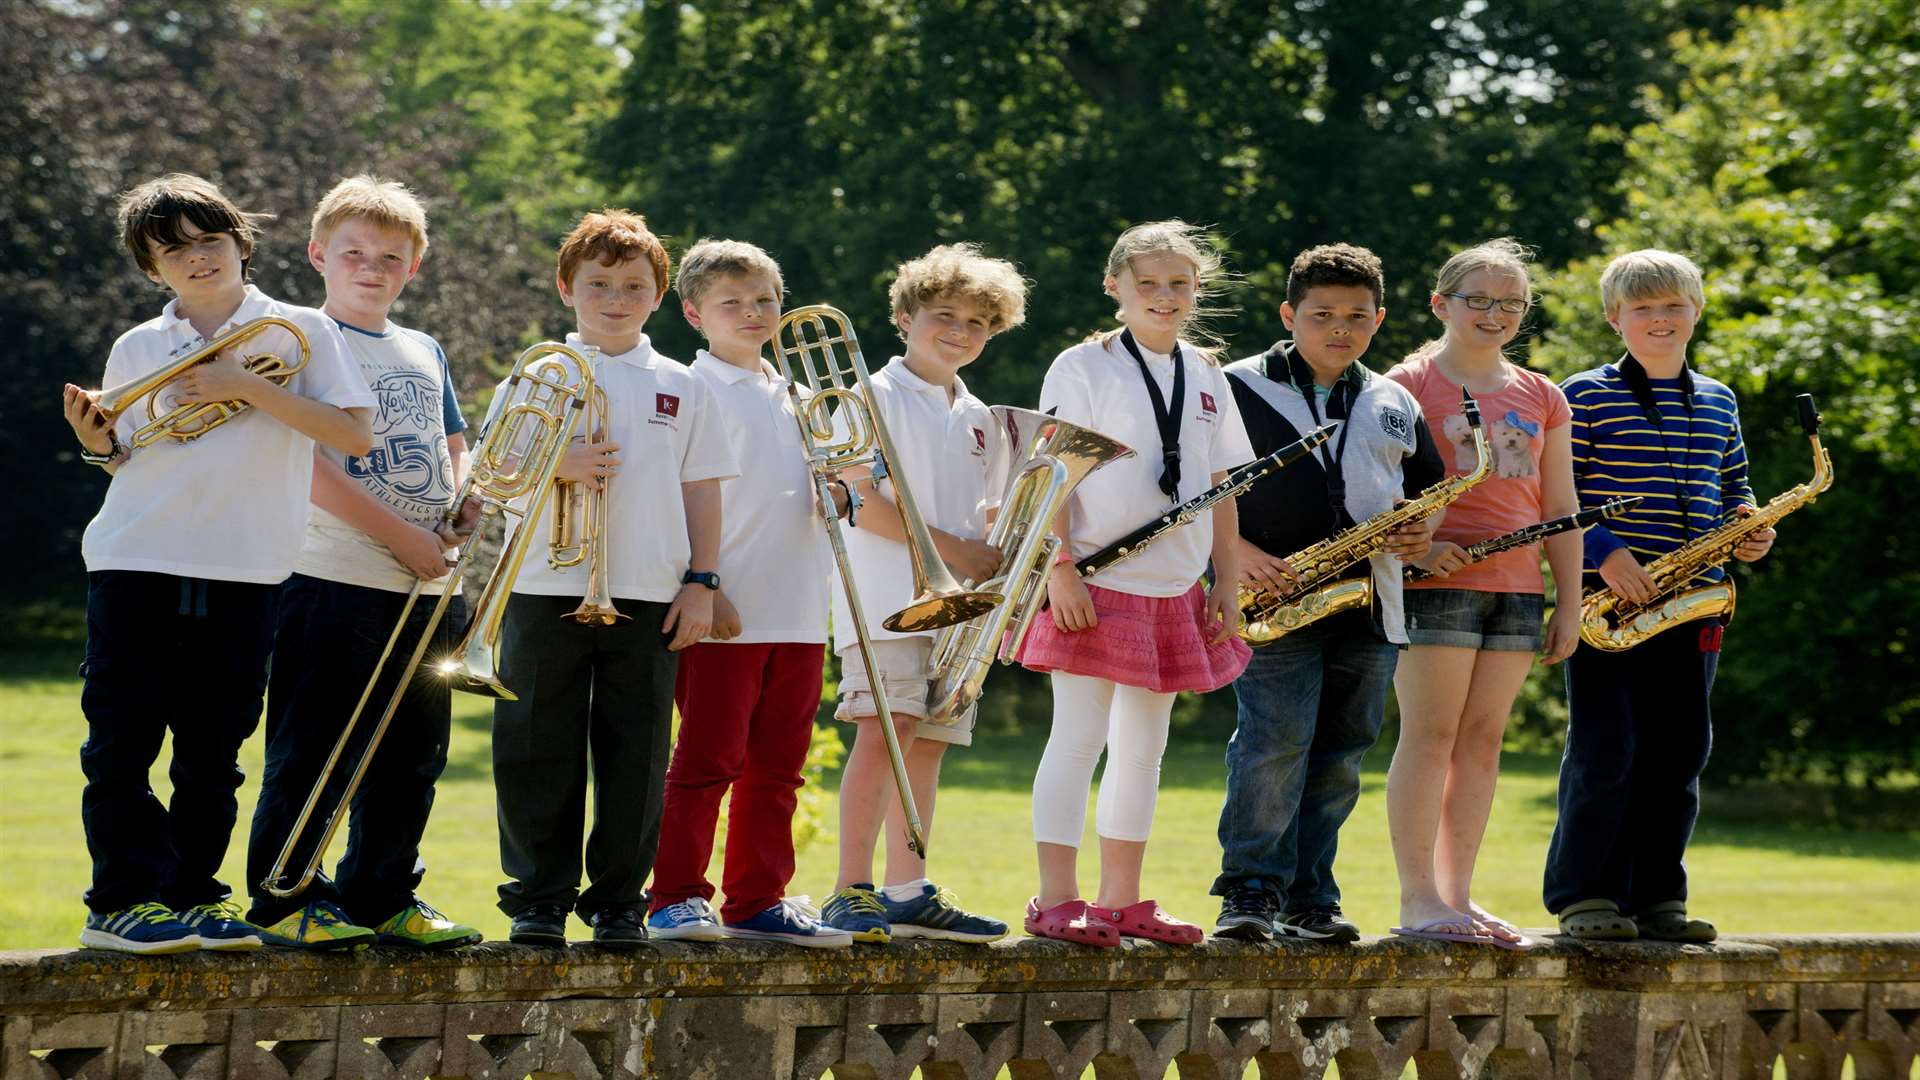 Primary school children who are starting to learn orchestral instruments can enjoy playing with others for the first time at a free Orchestra Explorers project in West Kent